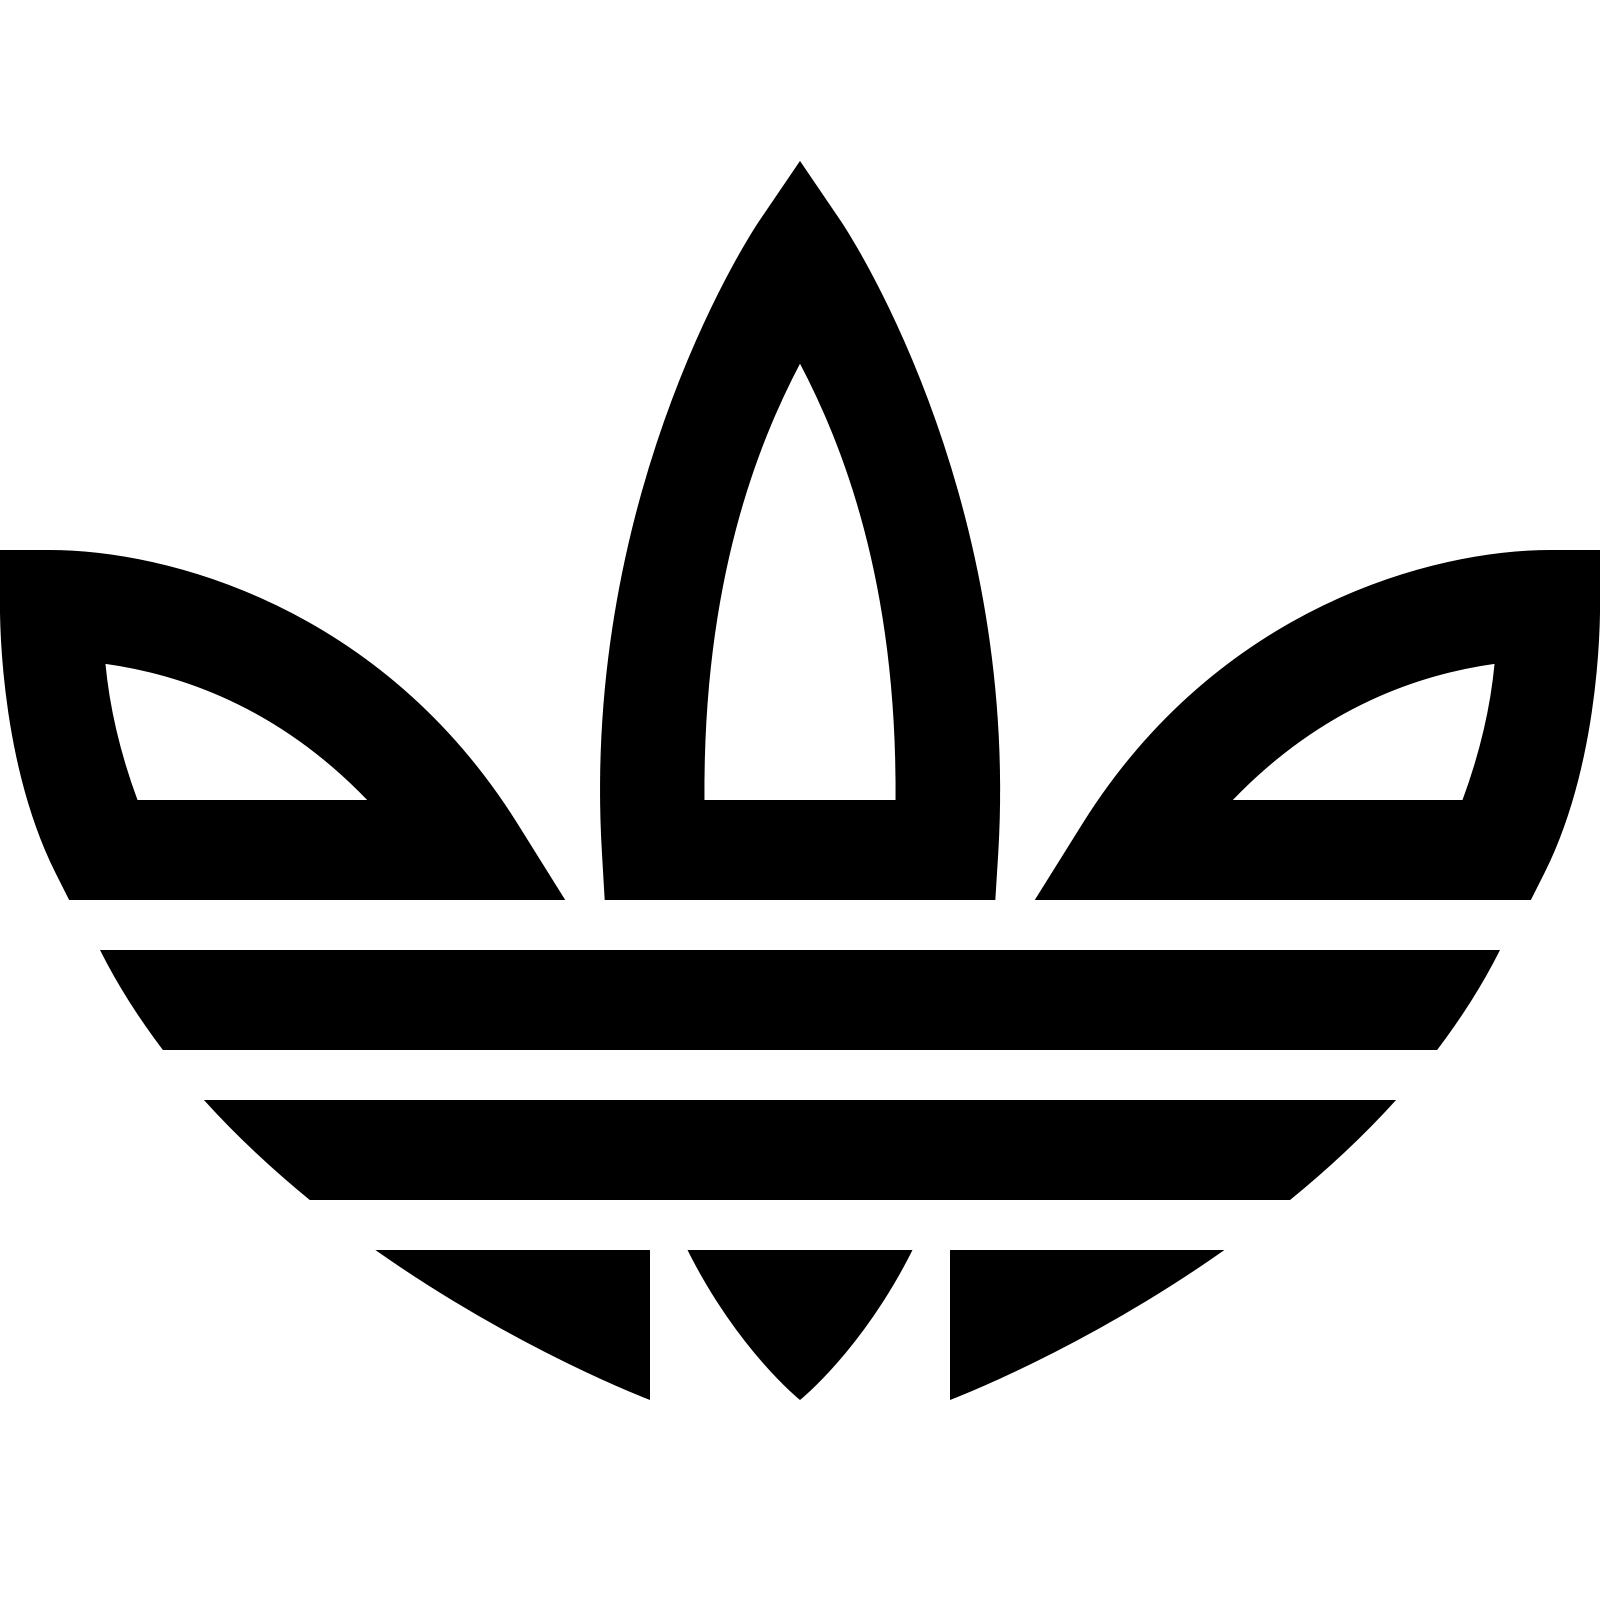 Adidas Trefoil Icon. Png 50 Px - Adidas Trefoil, Transparent background PNG HD thumbnail